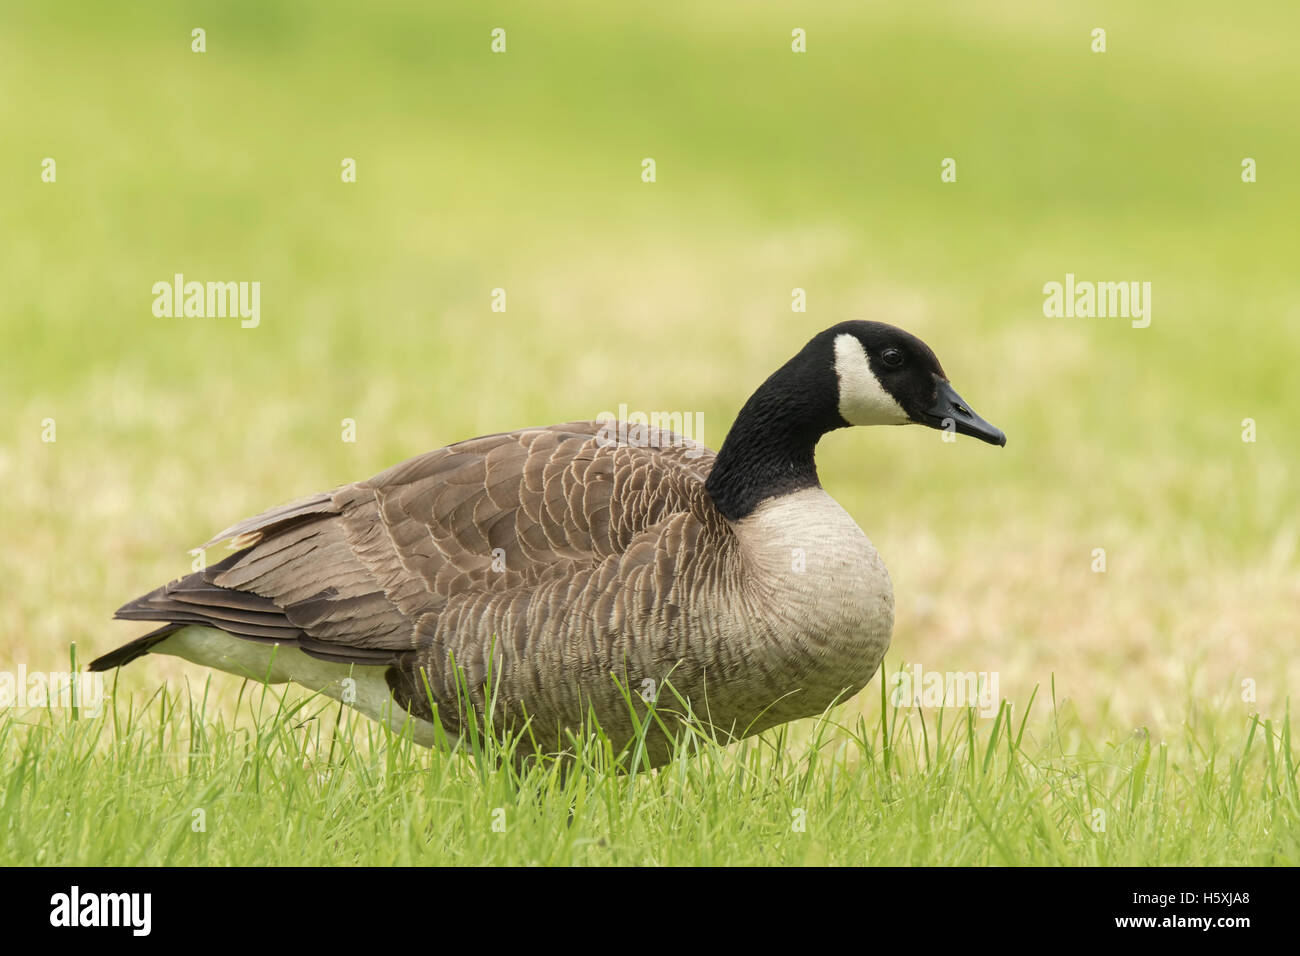 Close-up of a Canada goose (Branta canadensis) walking in a meadow Stock Photo